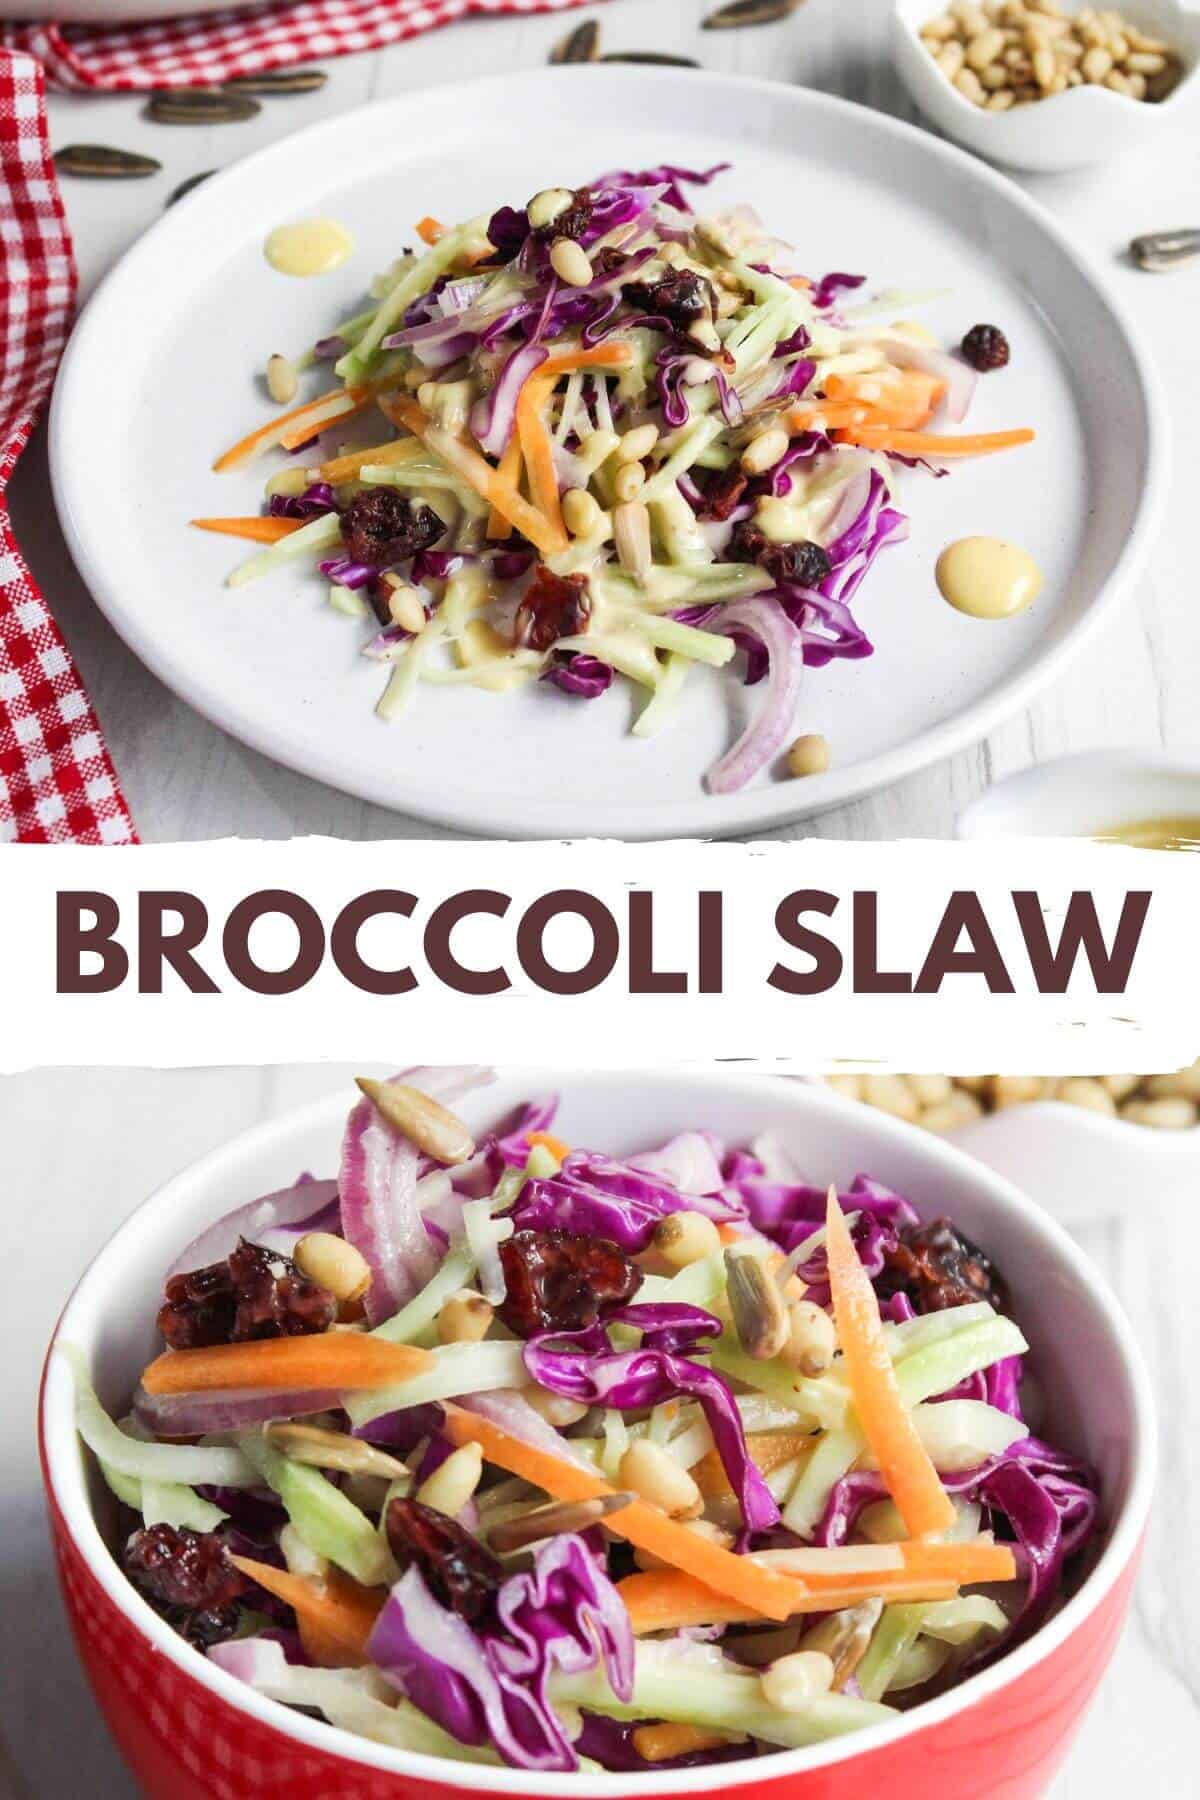 Two servings of broccoli slaw.